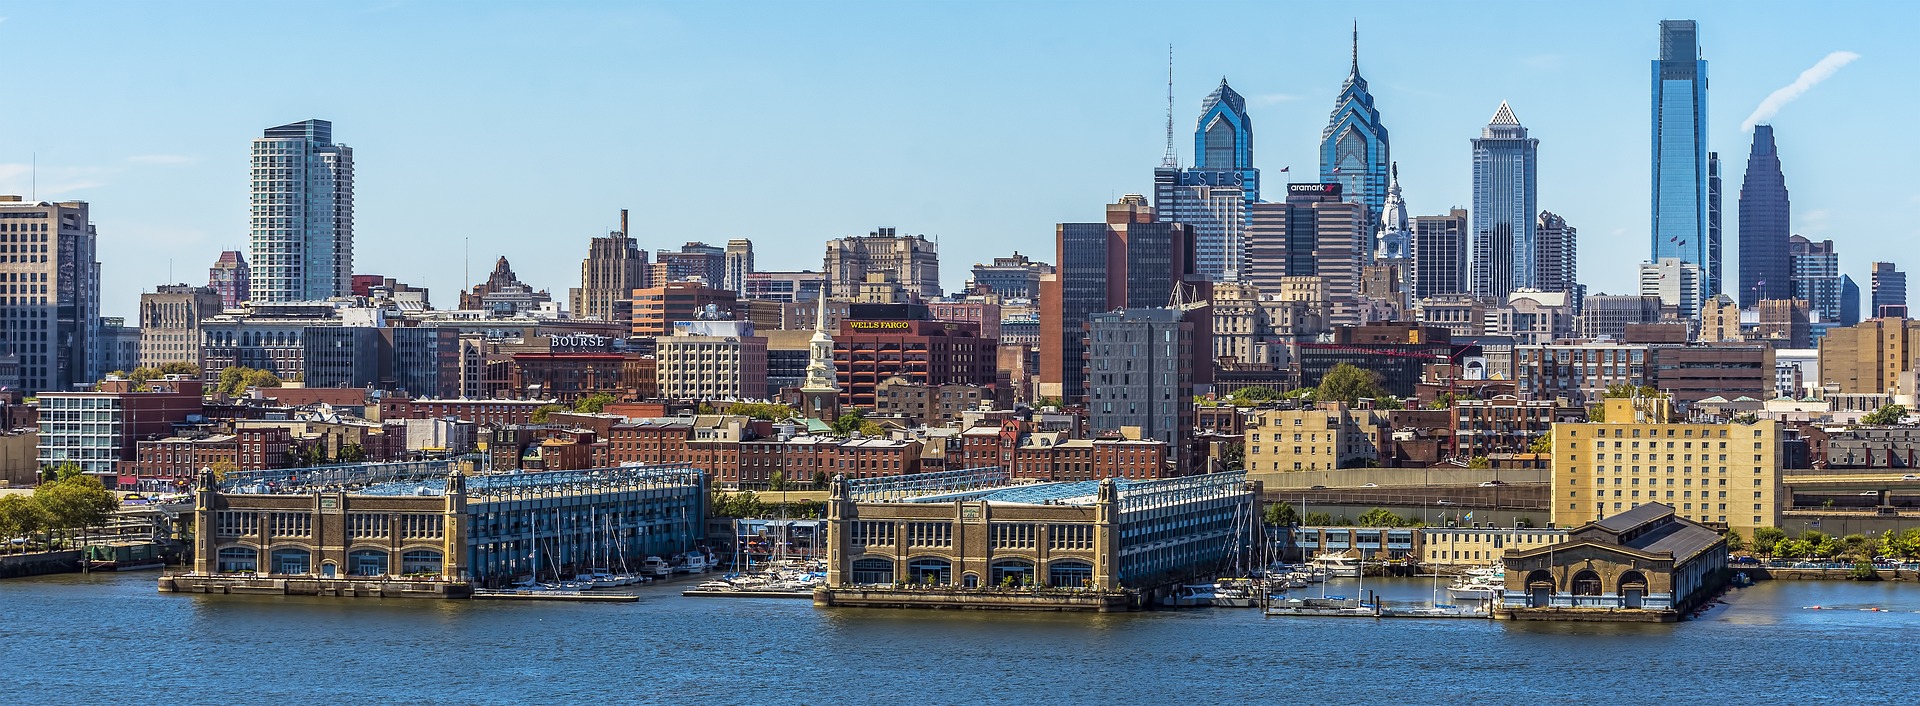 Philadelphia skyline with the riverfront and skyscrapers